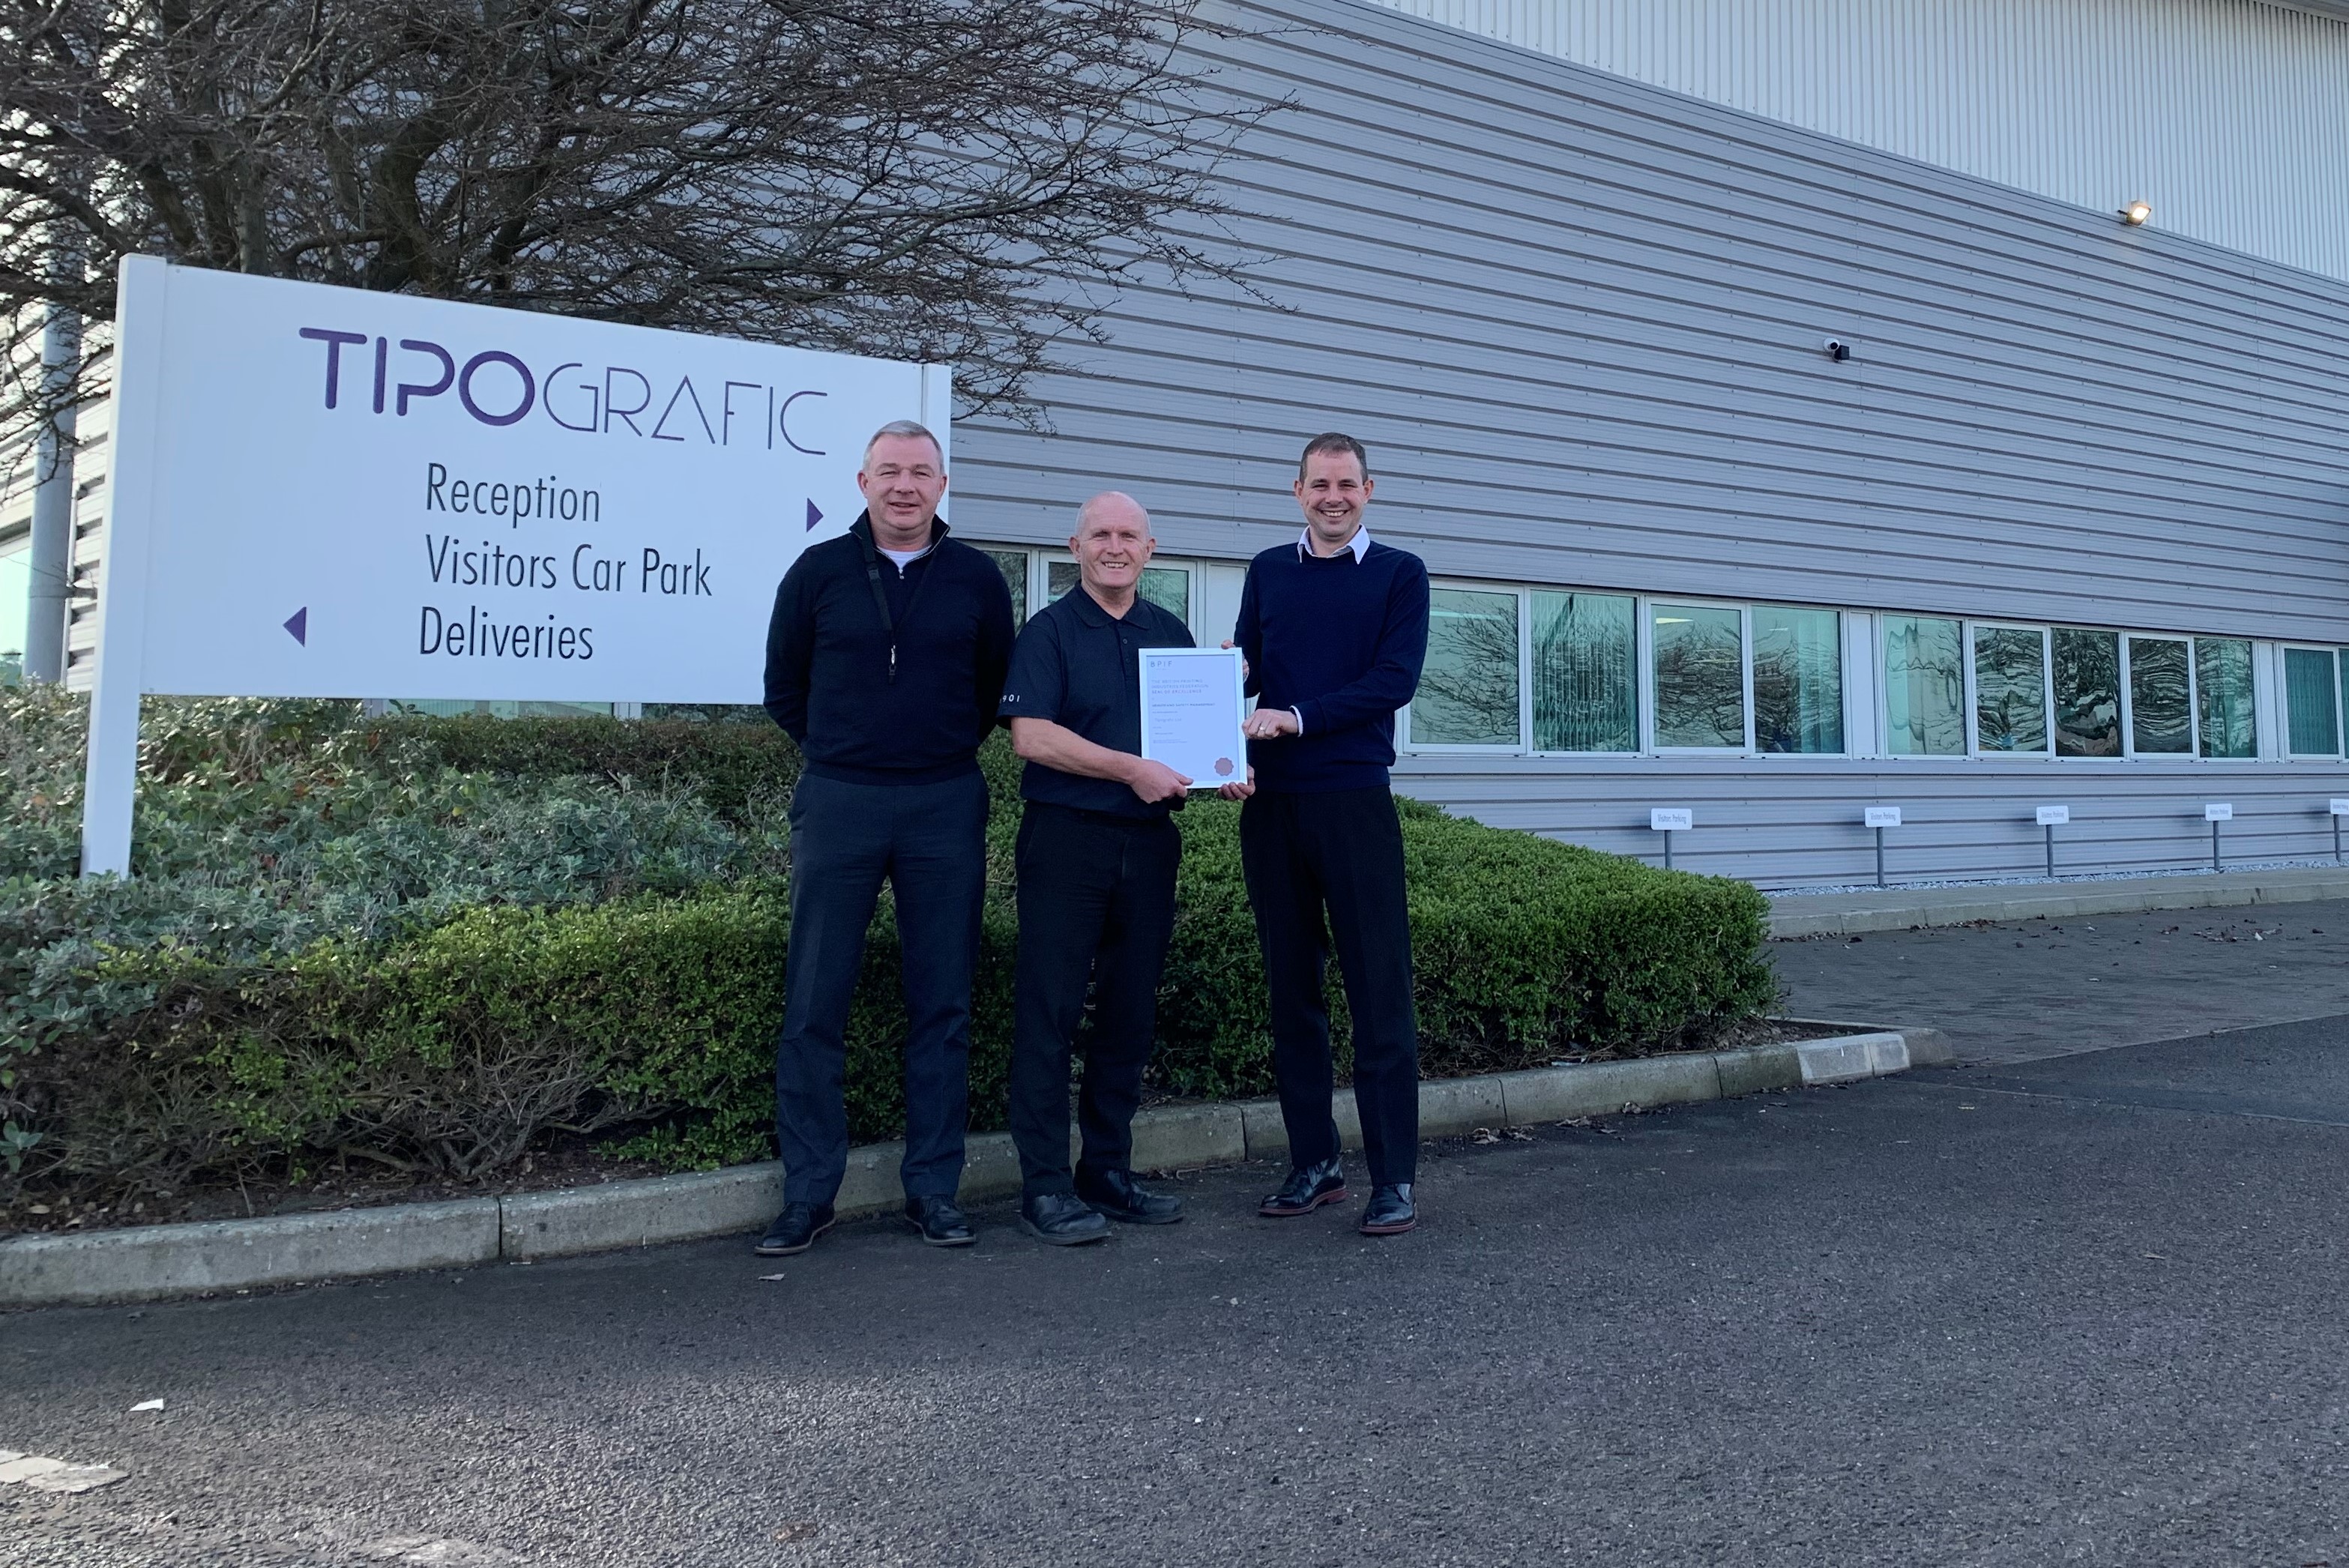 Tipografic achieves their renewal of BPIF Health & Safety Seal of Excellence